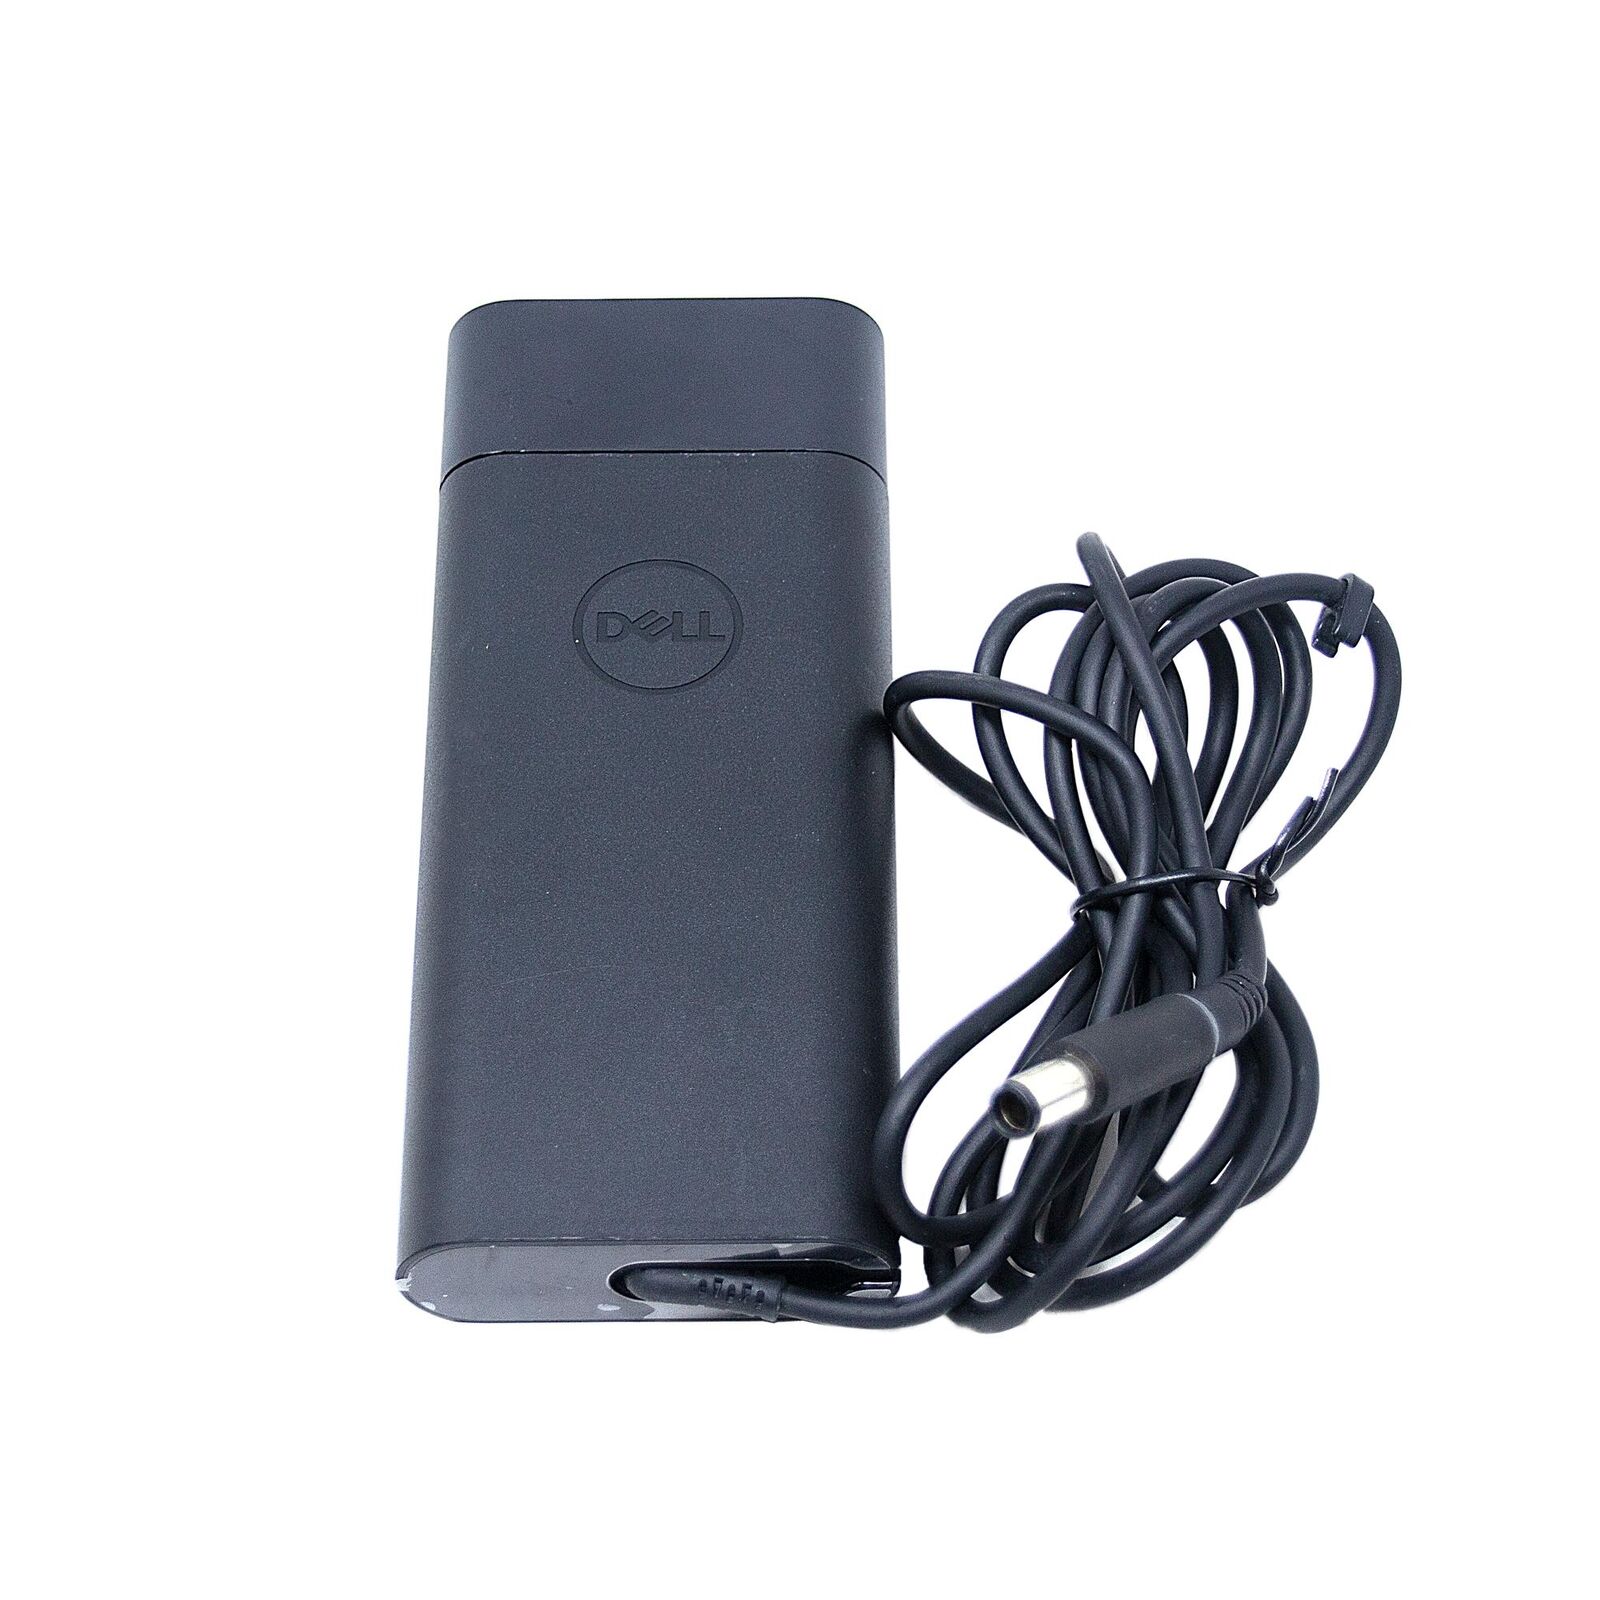 DELL FR613 19.5V 4.62A 90W Genuine Original AC Power Adapter Charger